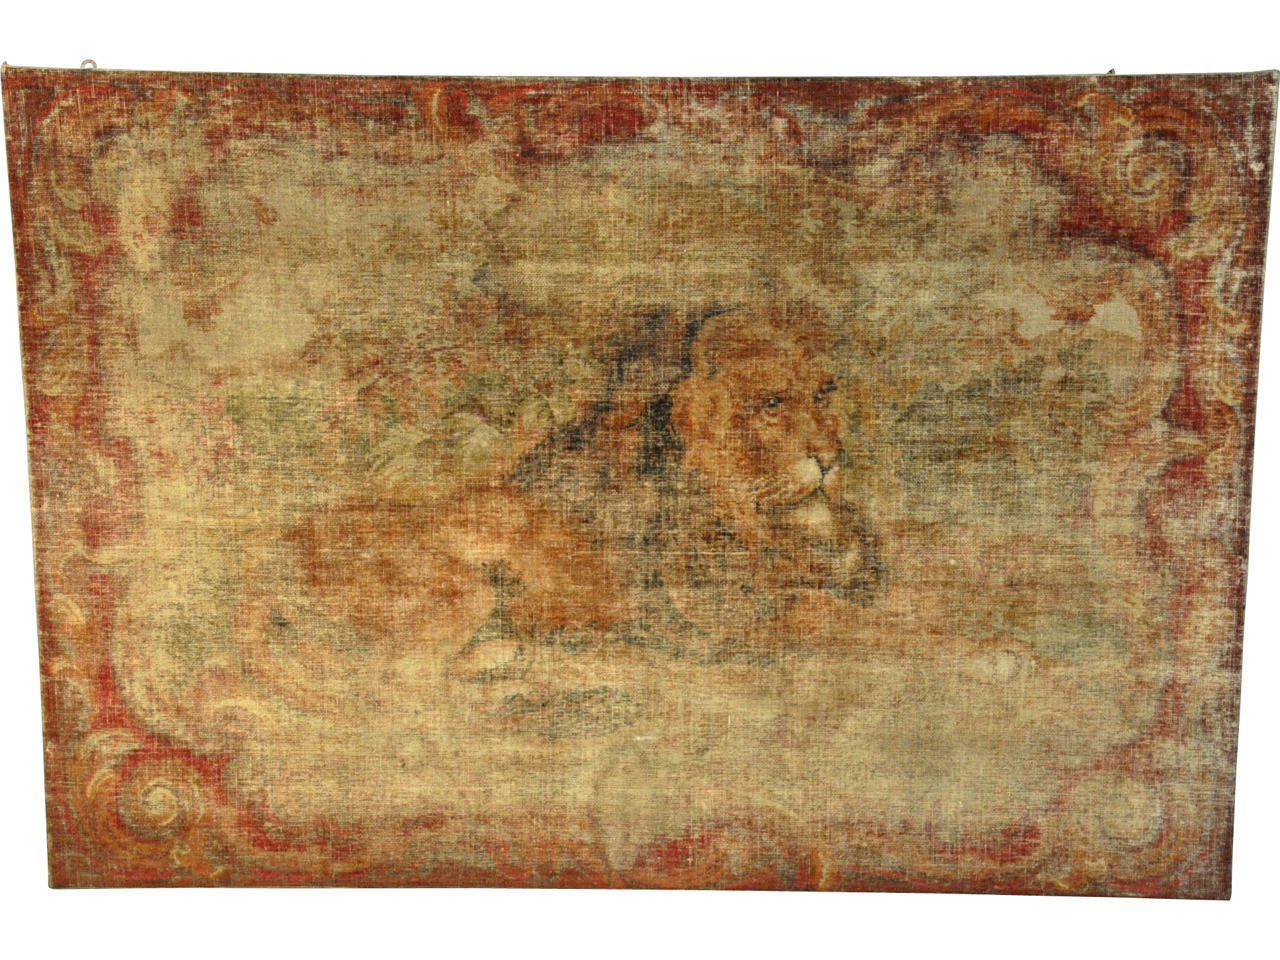 A stunning 18th century Italian needlepoint of a recumbent lion. This magnificent piece is stretched on a wooden frame with a finished side border. The palette is subdued in rich hues of sienna and ochre. This majestic lion has a proud and peaceful